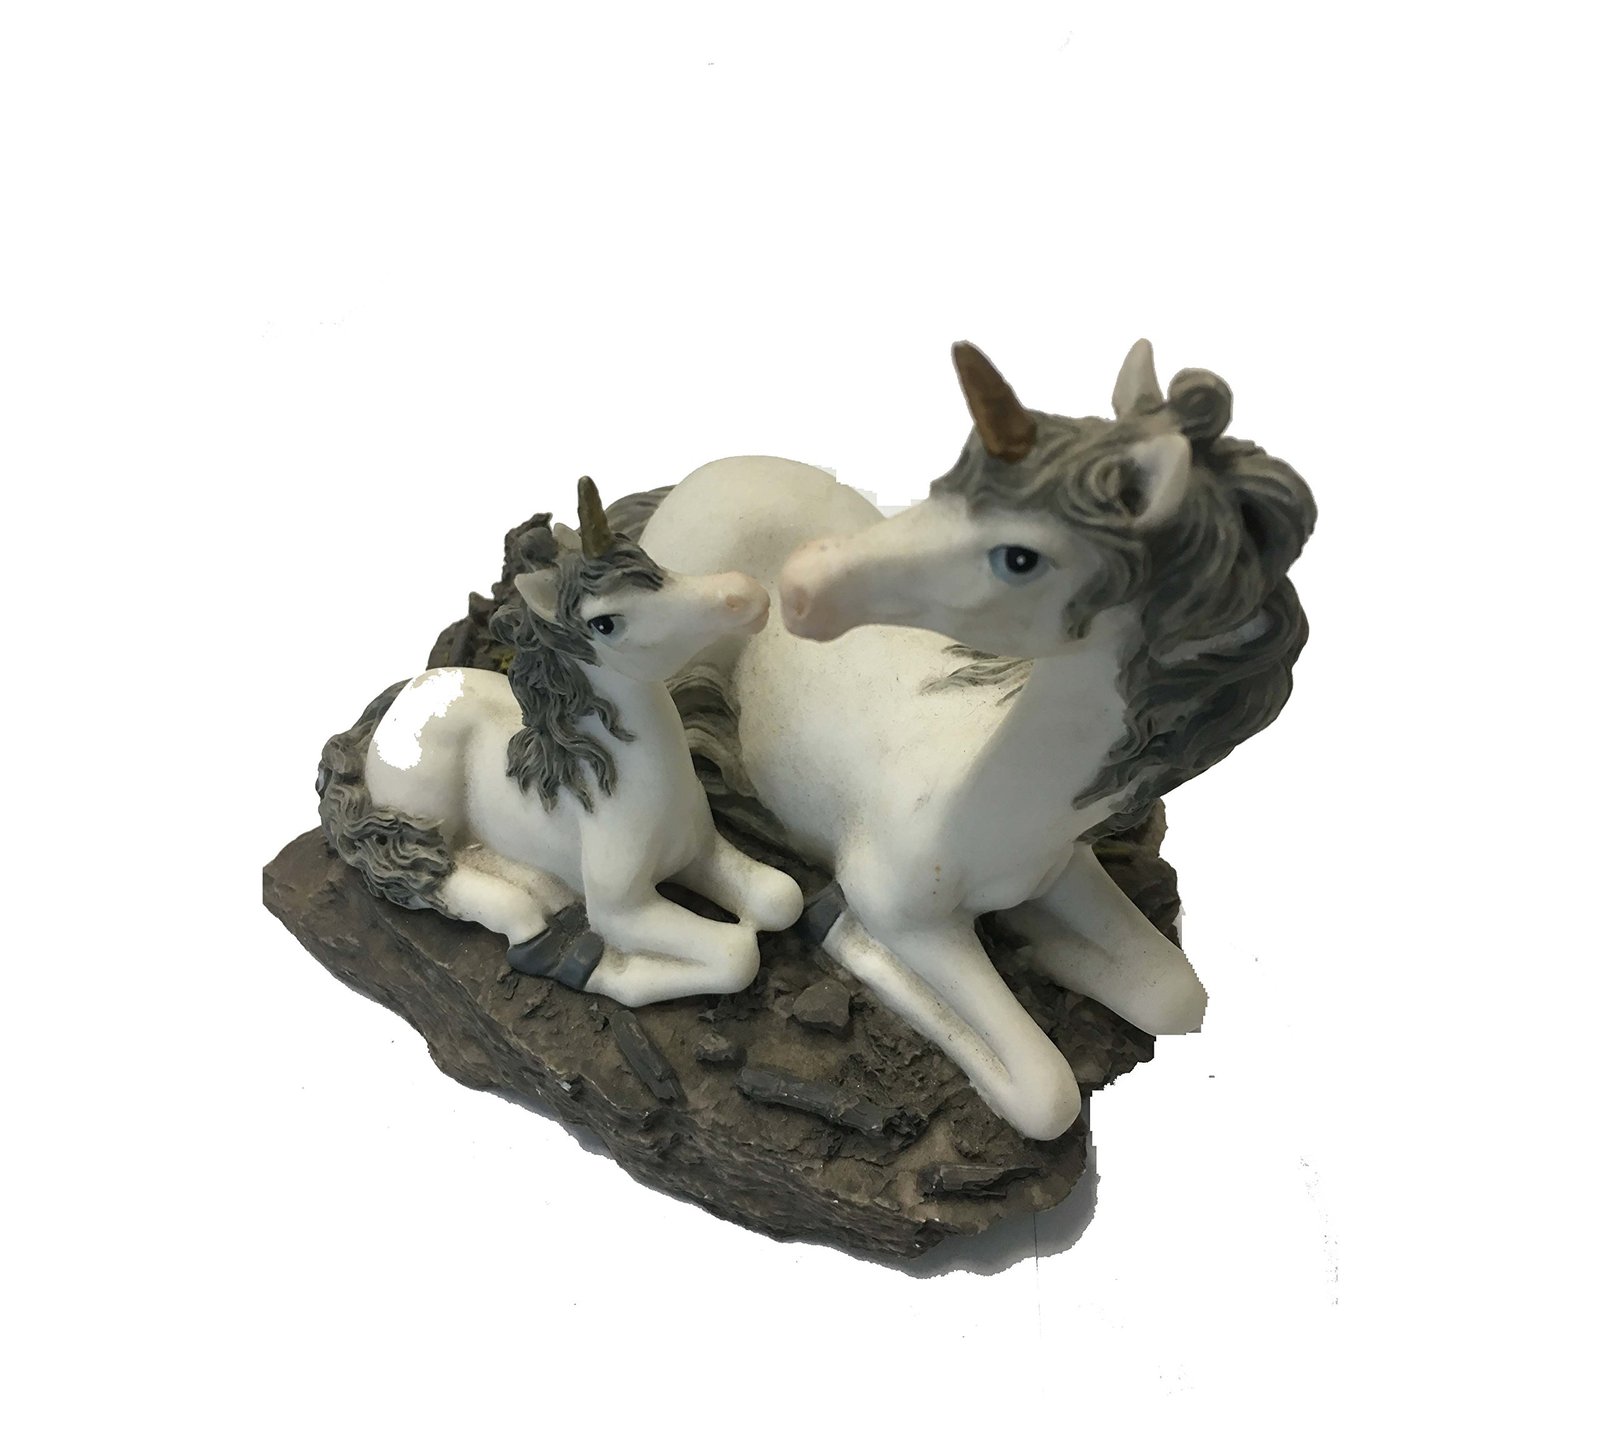 WESTLAND GIFTWARE # 346 Decorative Table top Ornament - White Unicorn with Fold - $12.50